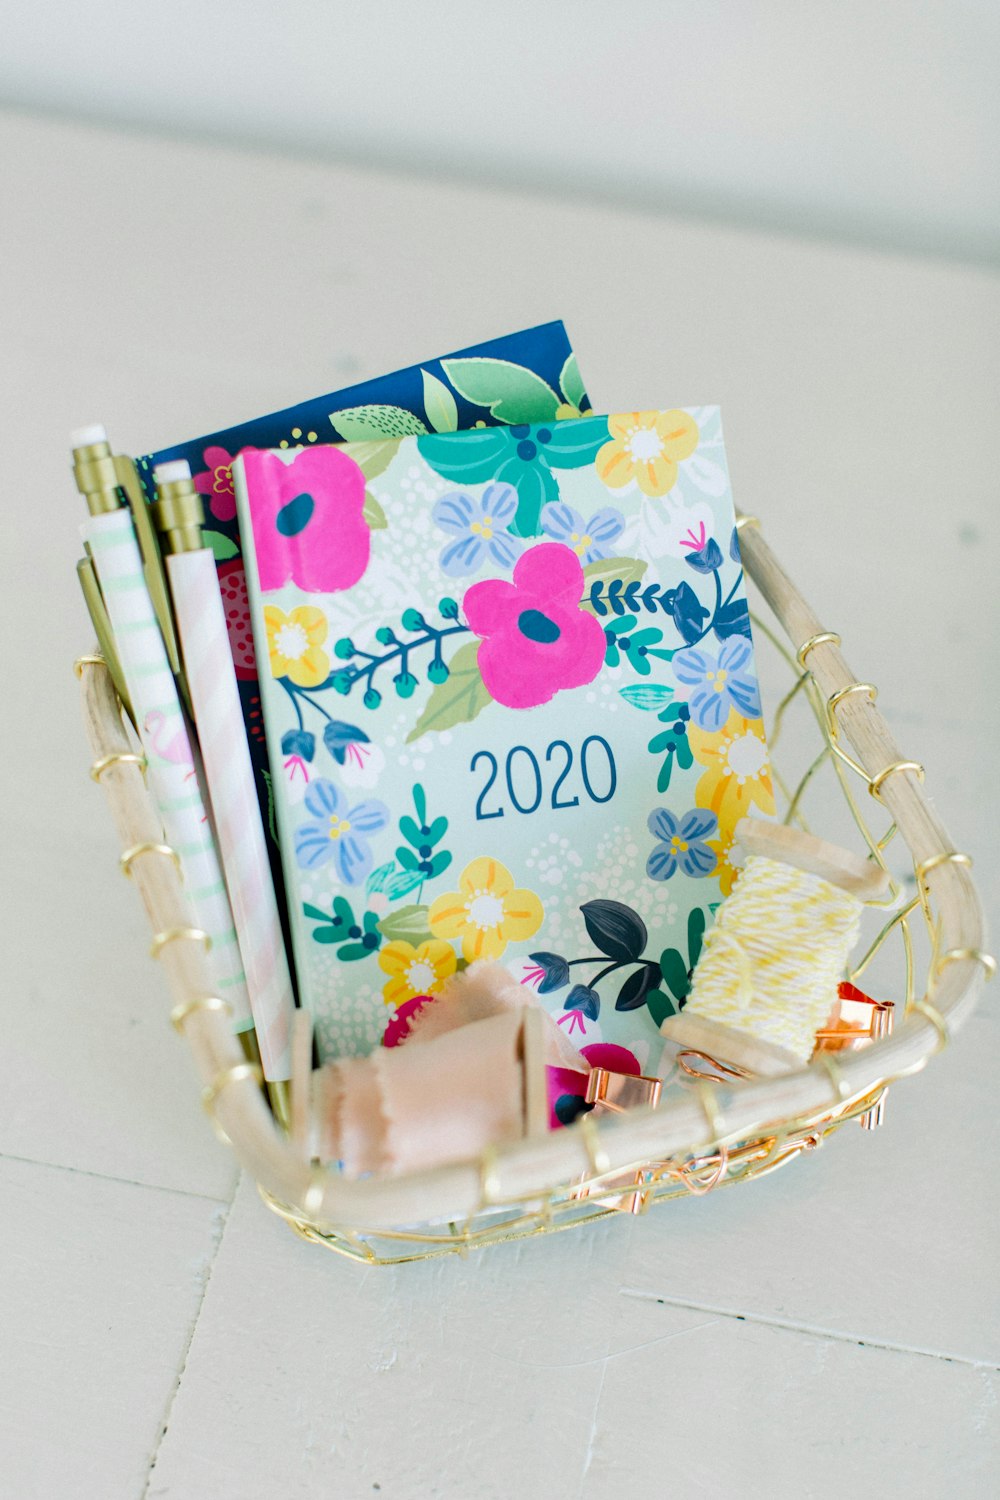 2020 books with basket